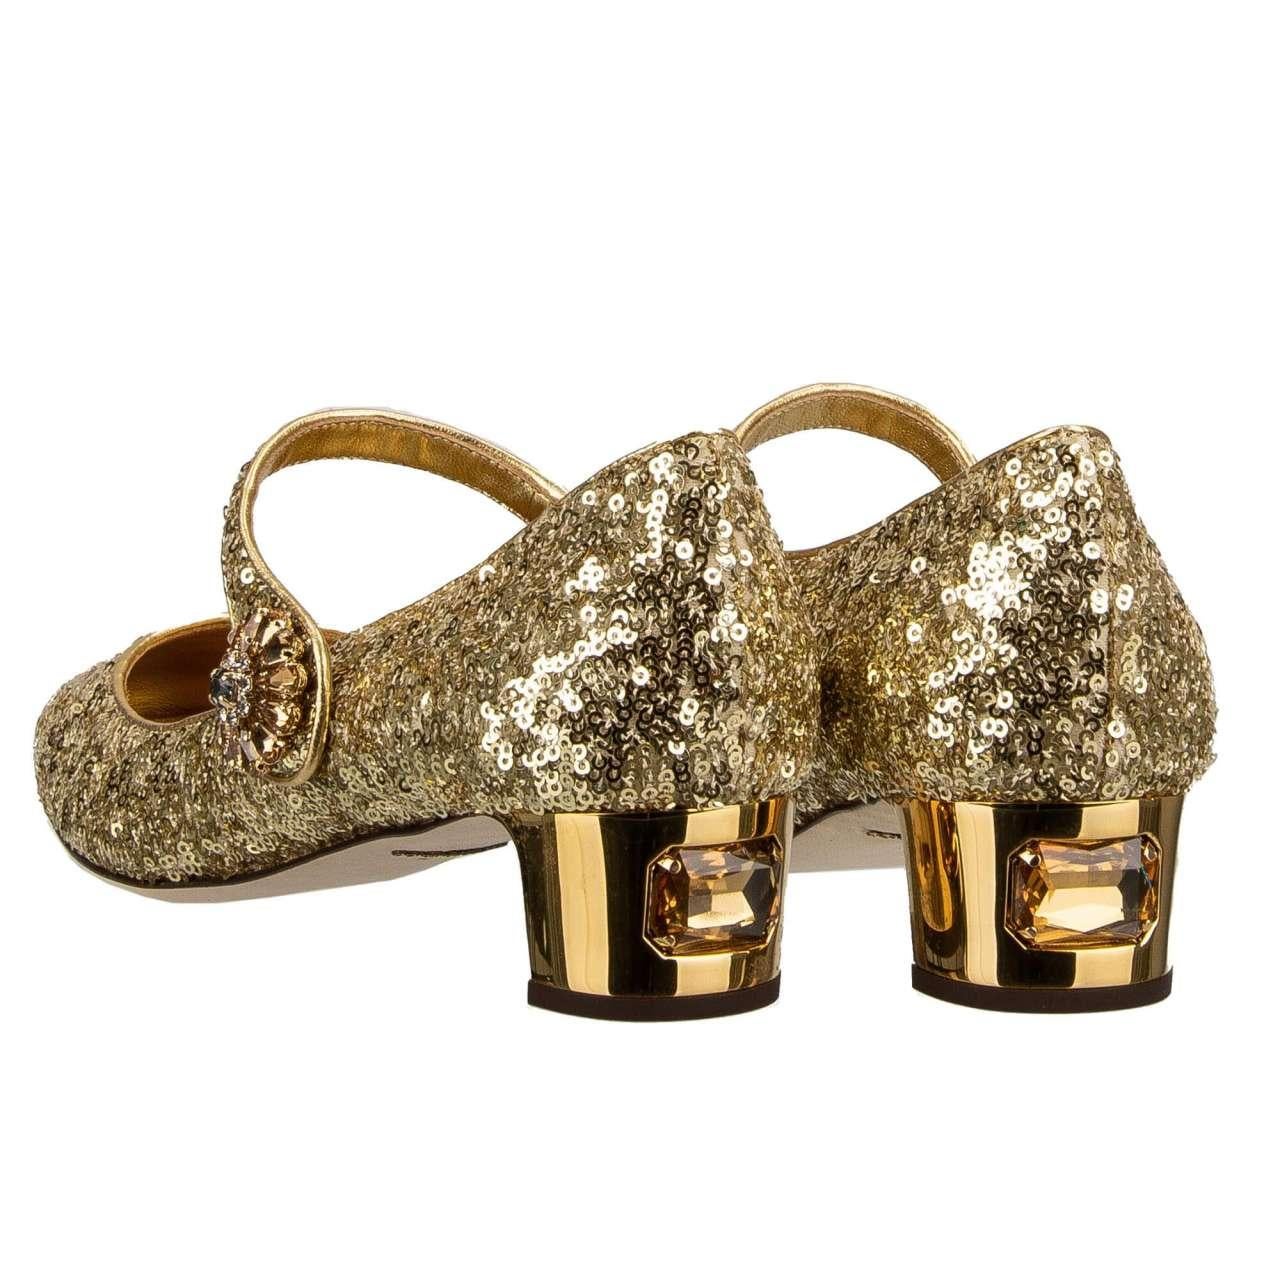 Women's Dolce & Gabbana - Sequin Crystal Heels Mary Jane Pumps VALLY Gold 40 US 10 For Sale